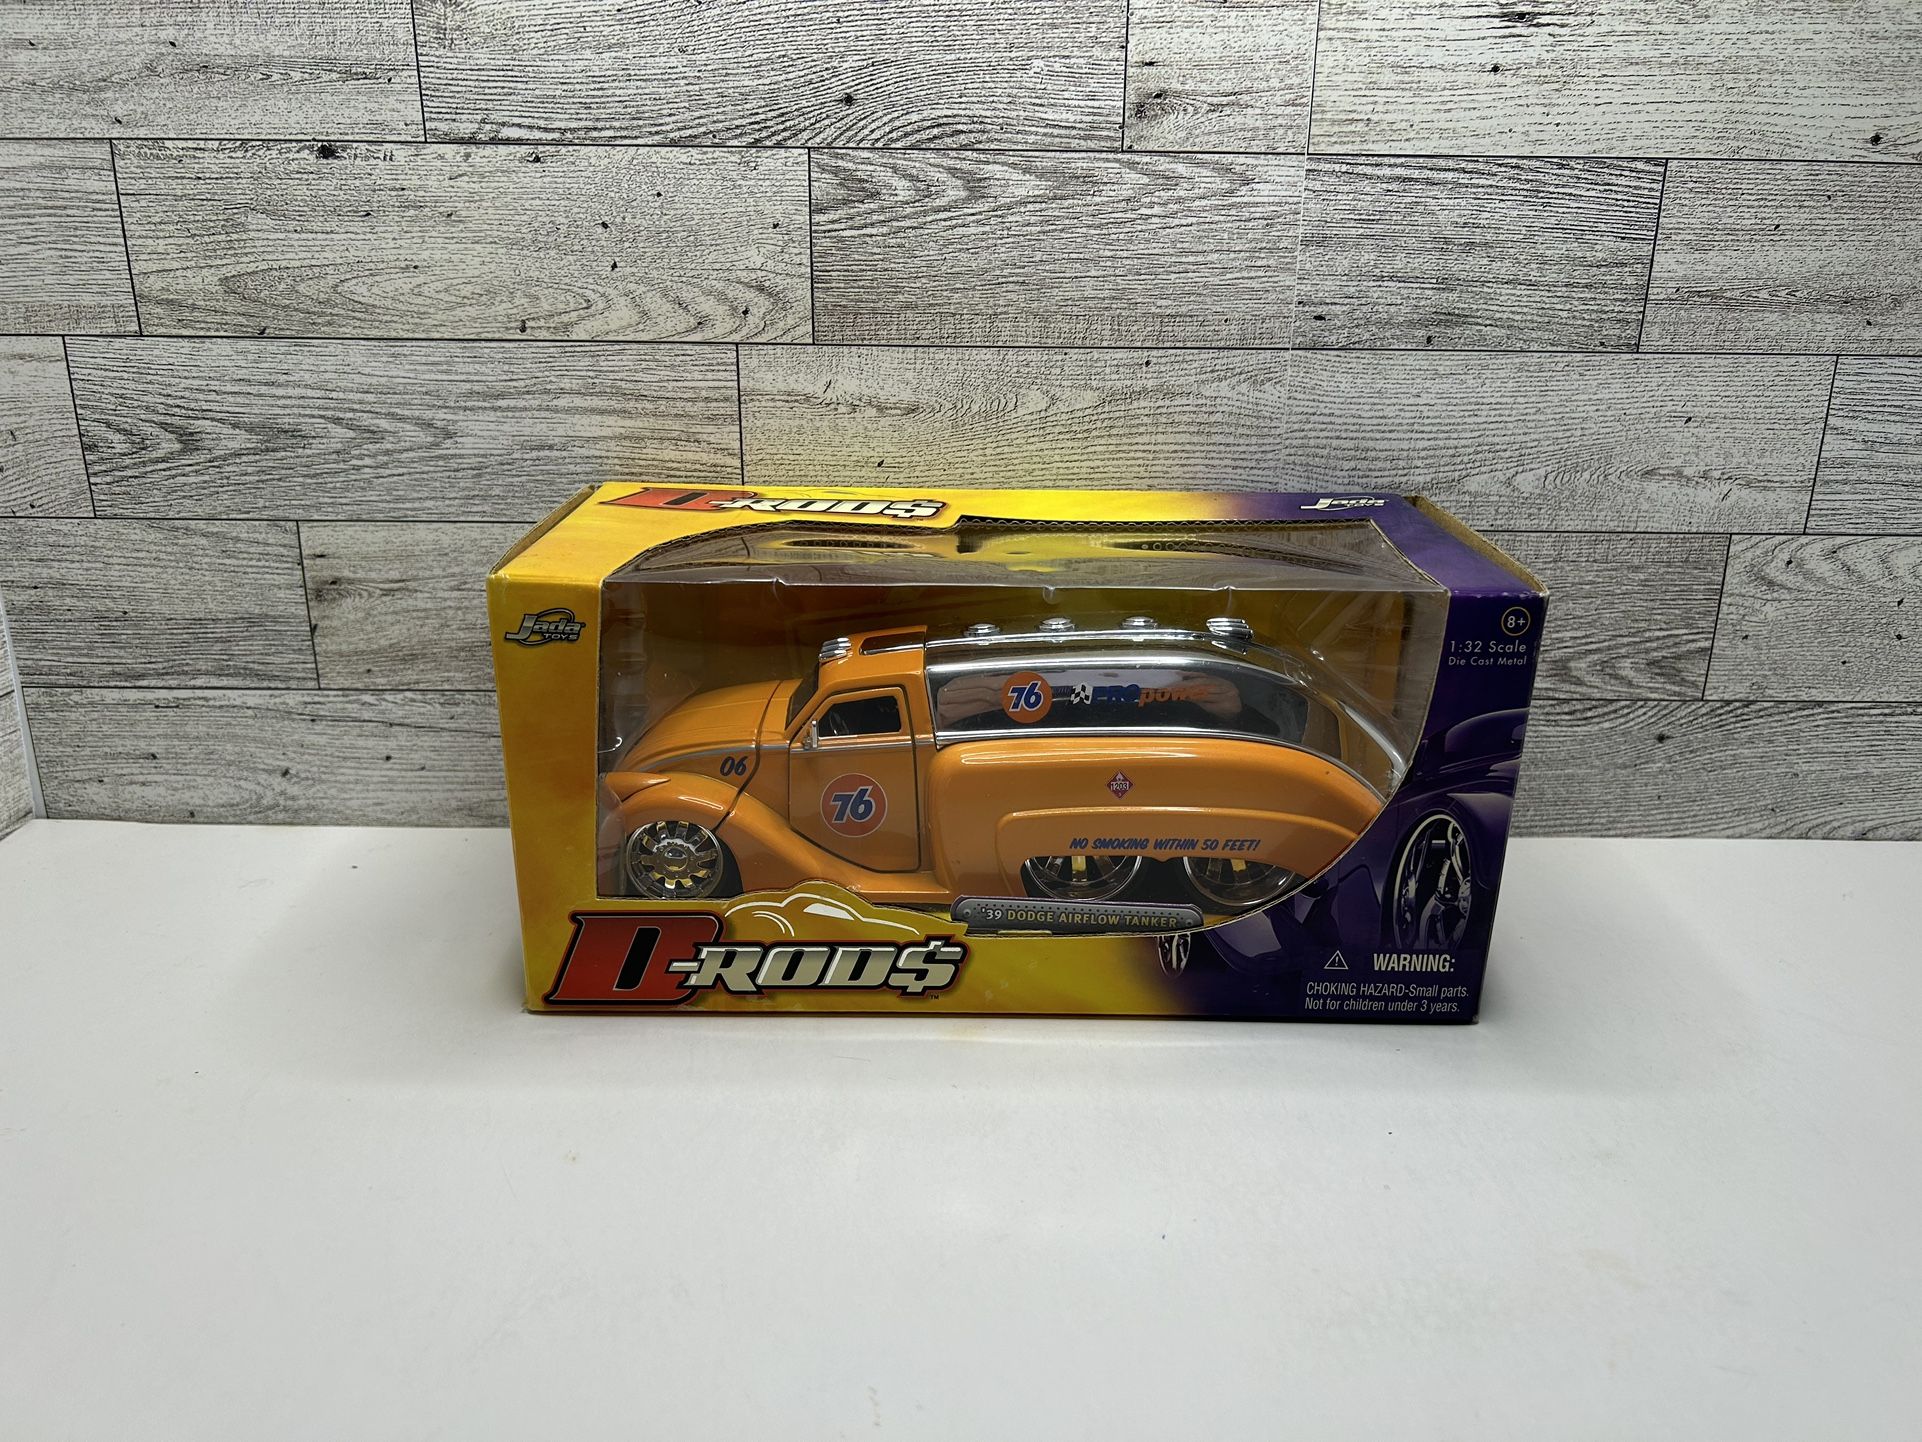 Jada Toys D-Rods Yellow ‘1939 Dodge Airflow 76 ProPower Tanker • Die Cast Metal & Plastic • Made in China Scale 1:32  